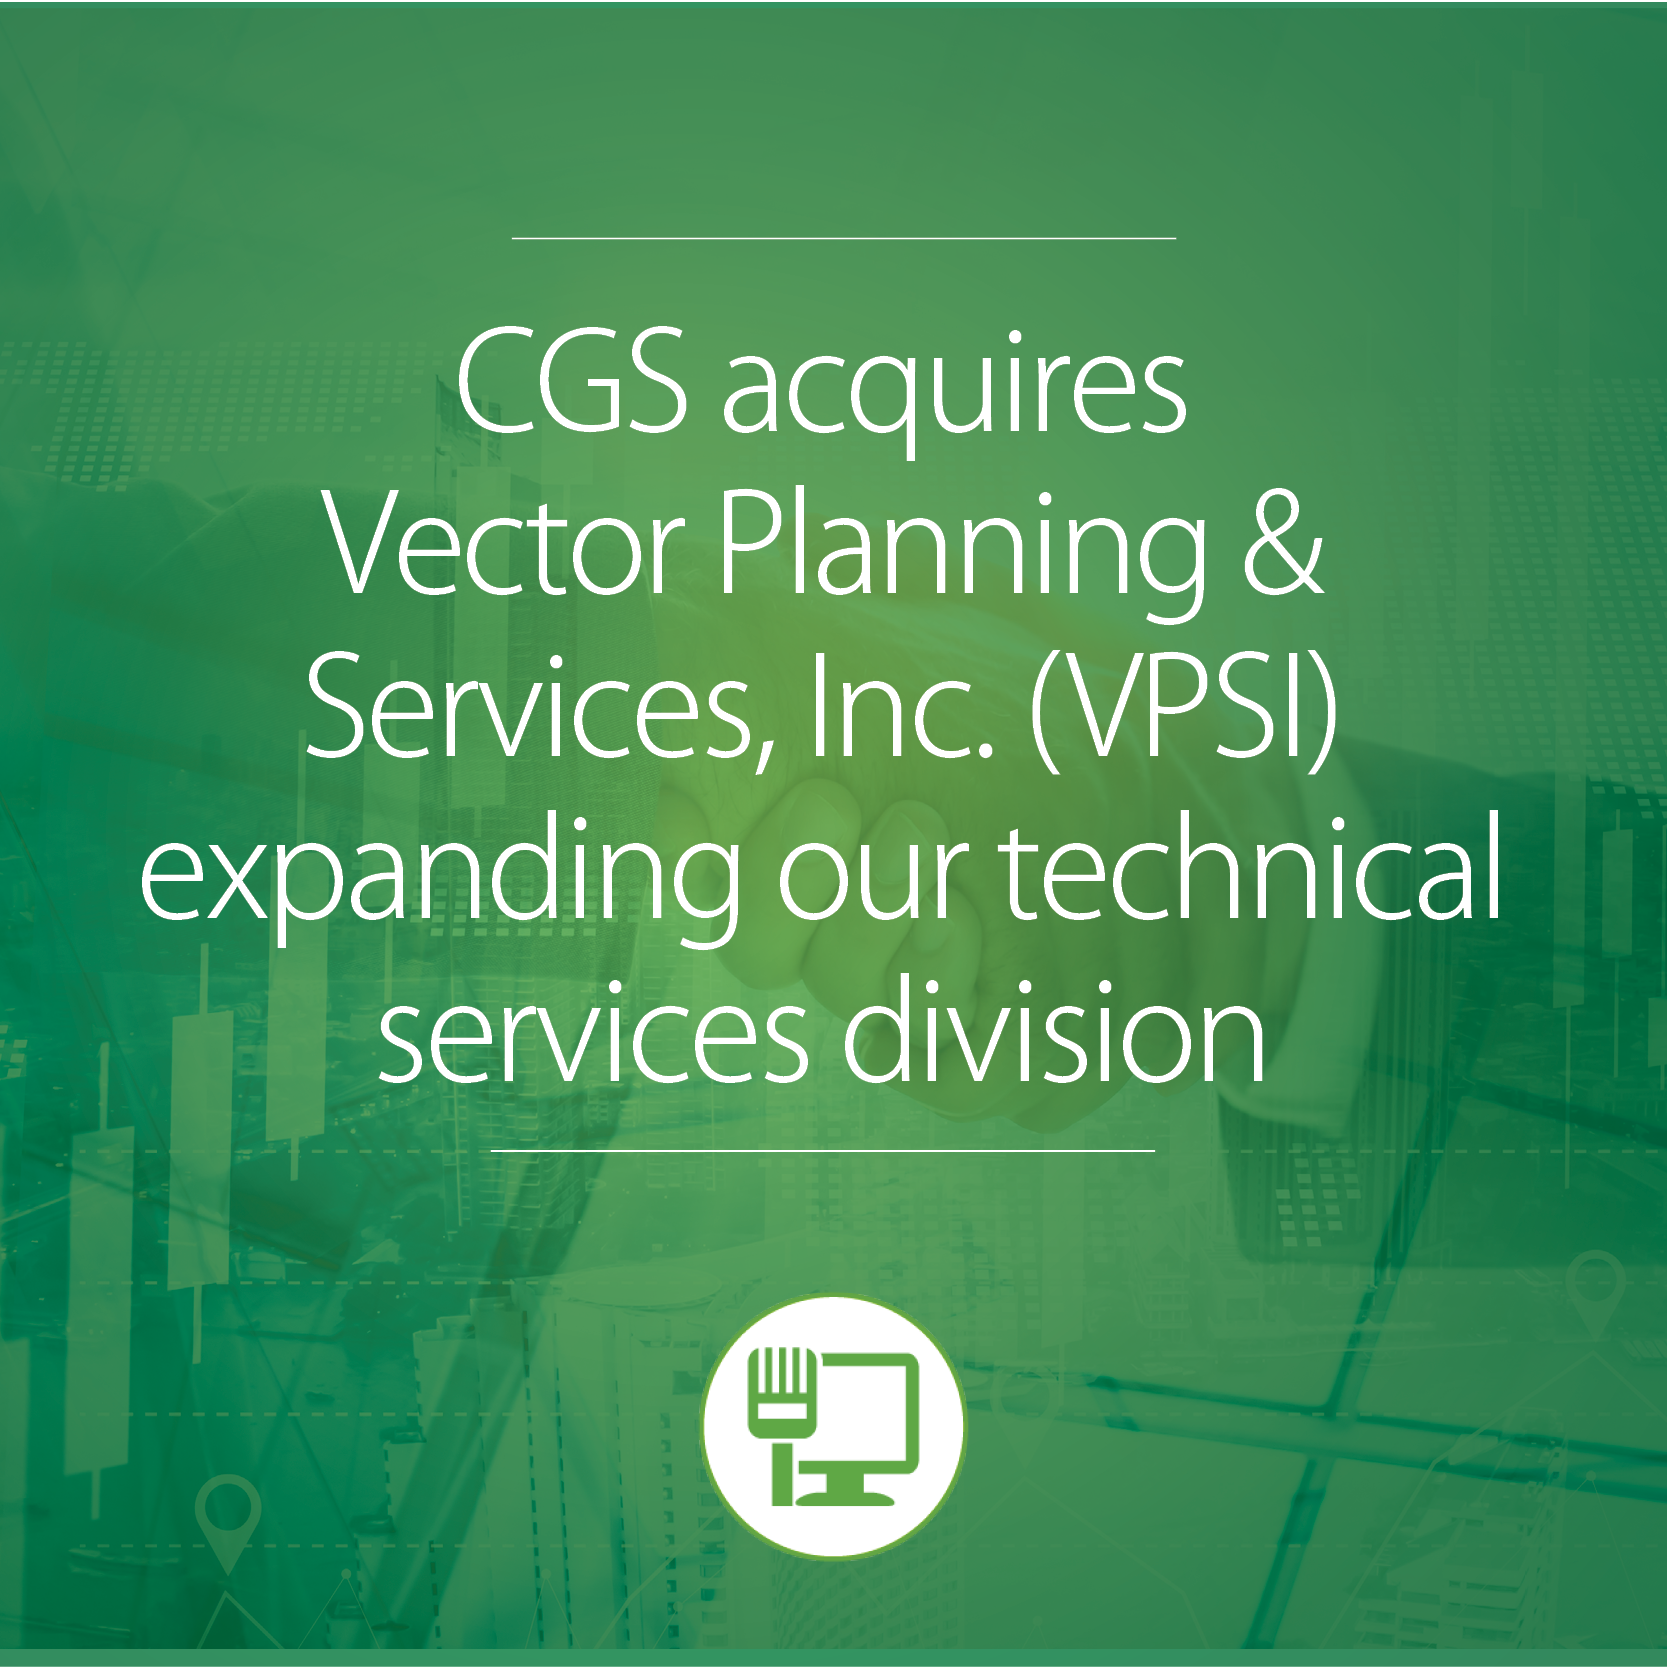 Chugach Government Solutions, LLC (CGS) acquires Vector Planning & Services, Inc. (VPSI) and expands technical services division capabilities